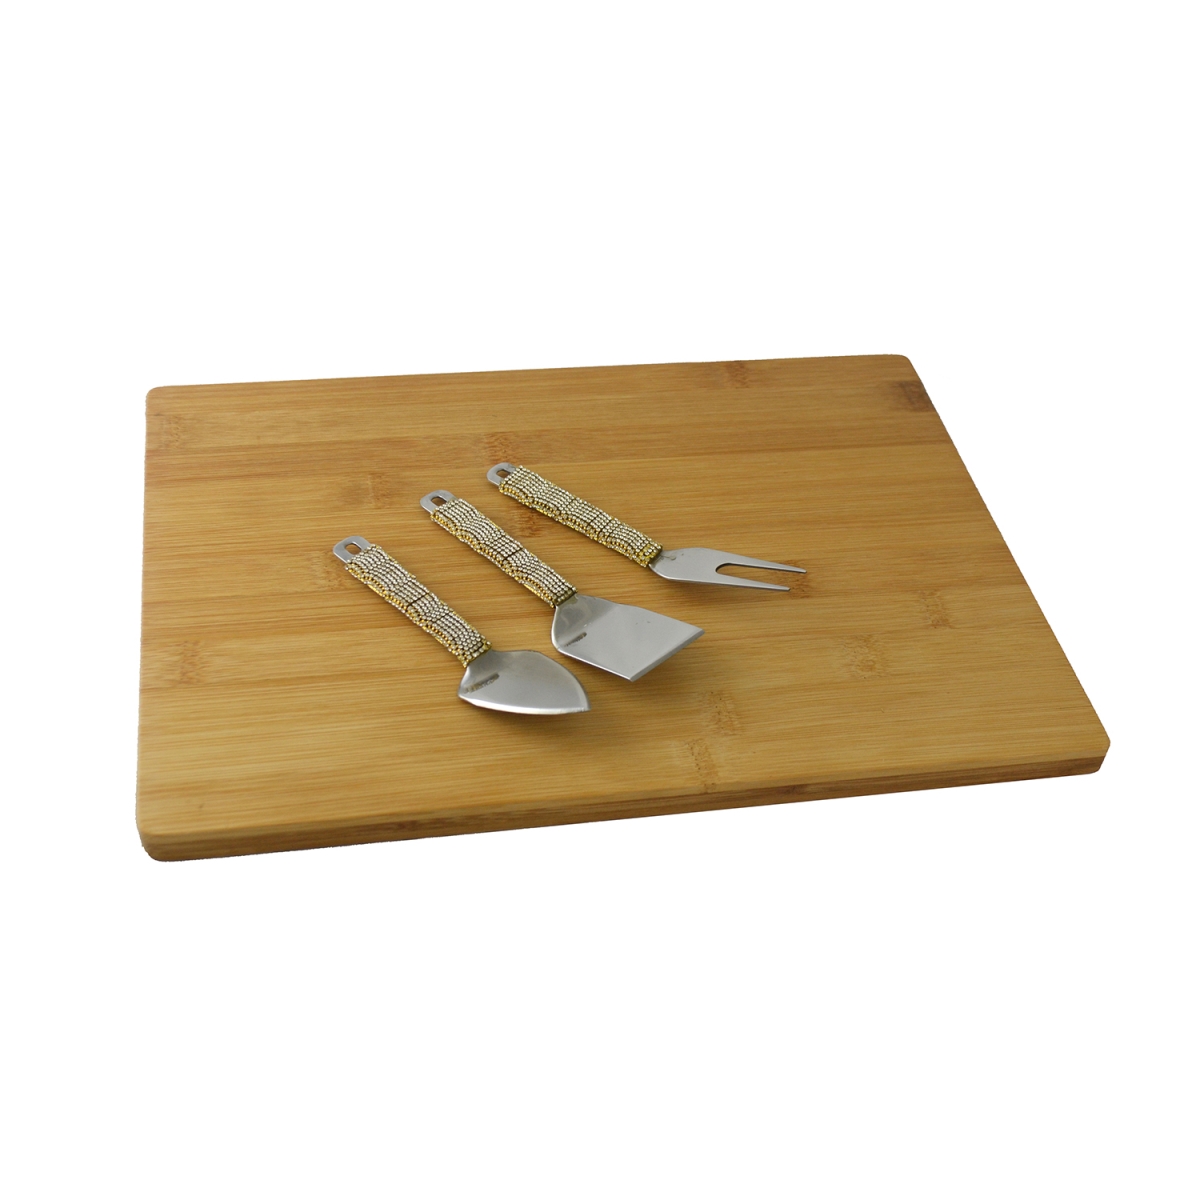 Picture of Three Star SX3130 13.25 x 9.5 in. Gold & Crystal Cheese Board With Utensil Set - 3 Piece